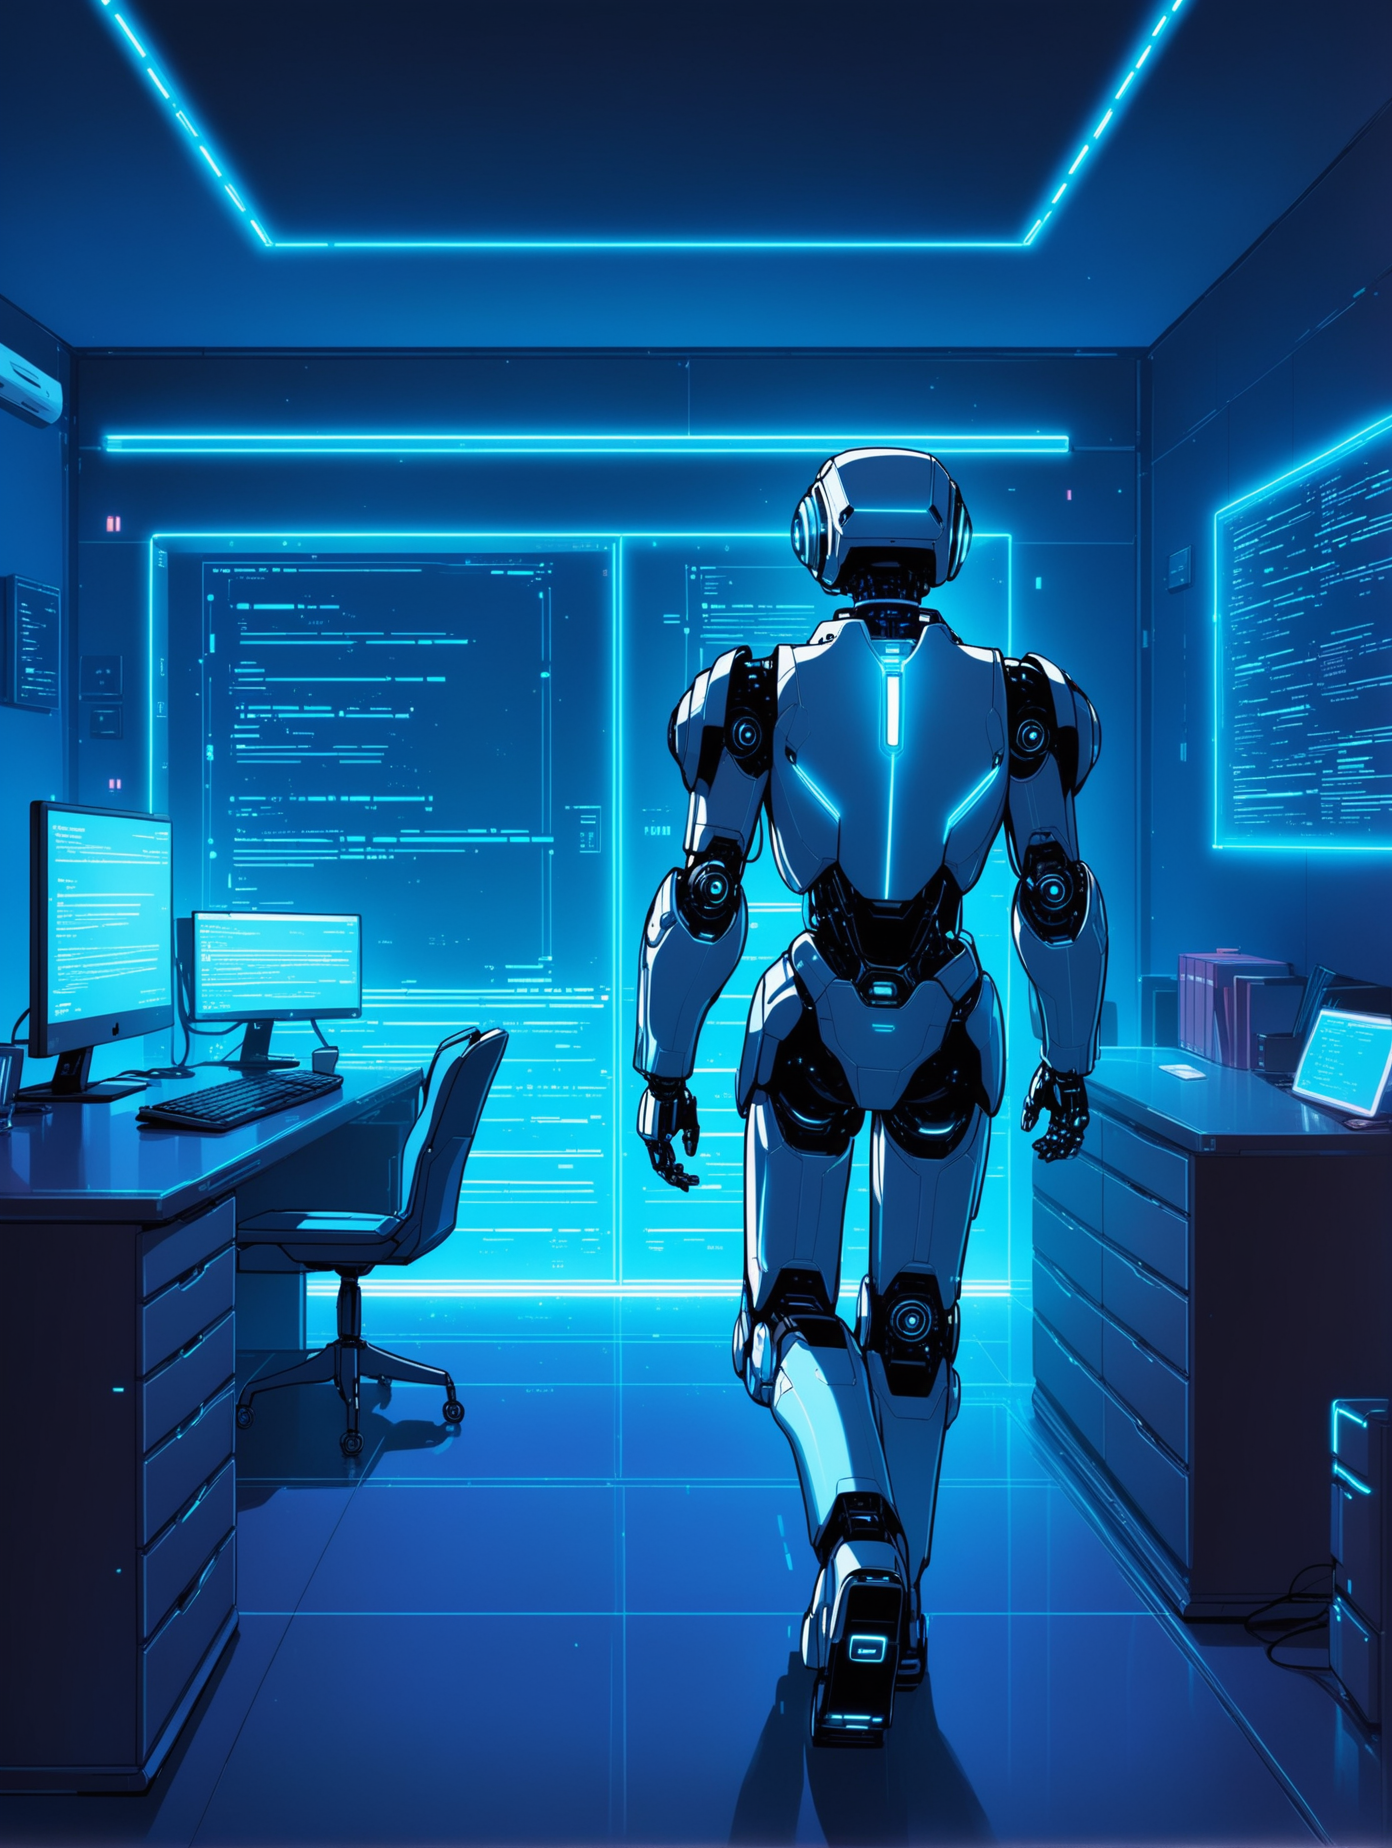 HighTech Bedroom Workspace AI Bot at Desk with Blue Aesthetic